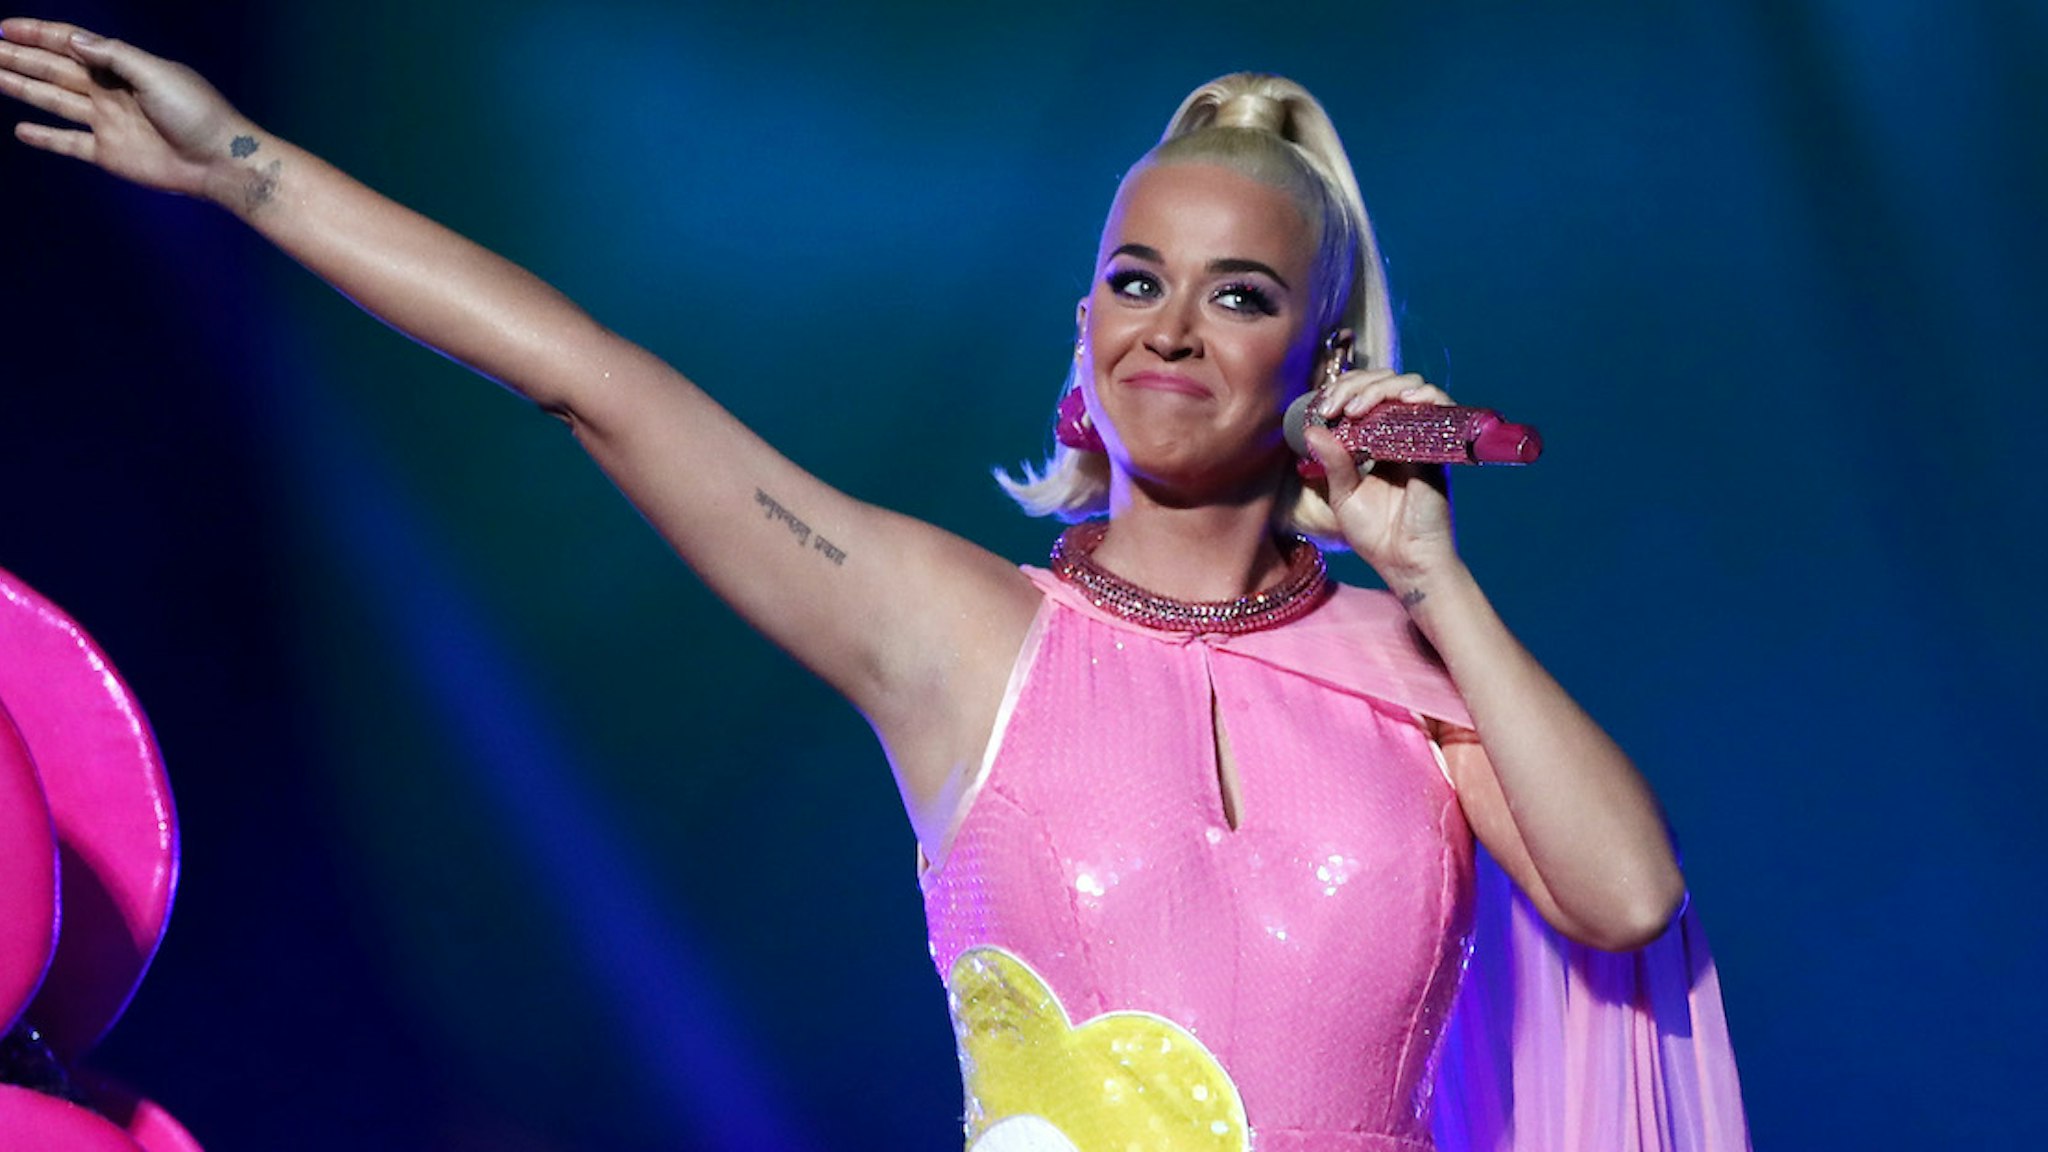 Katy Perry performs during a concert following the ICC Women's T20 Cricket World Cup Final between India and Australia at the Melbourne Cricket Ground on March 08, 2020 in Melbourne, Australia. (Photo by Cameron Spencer/Getty Images)